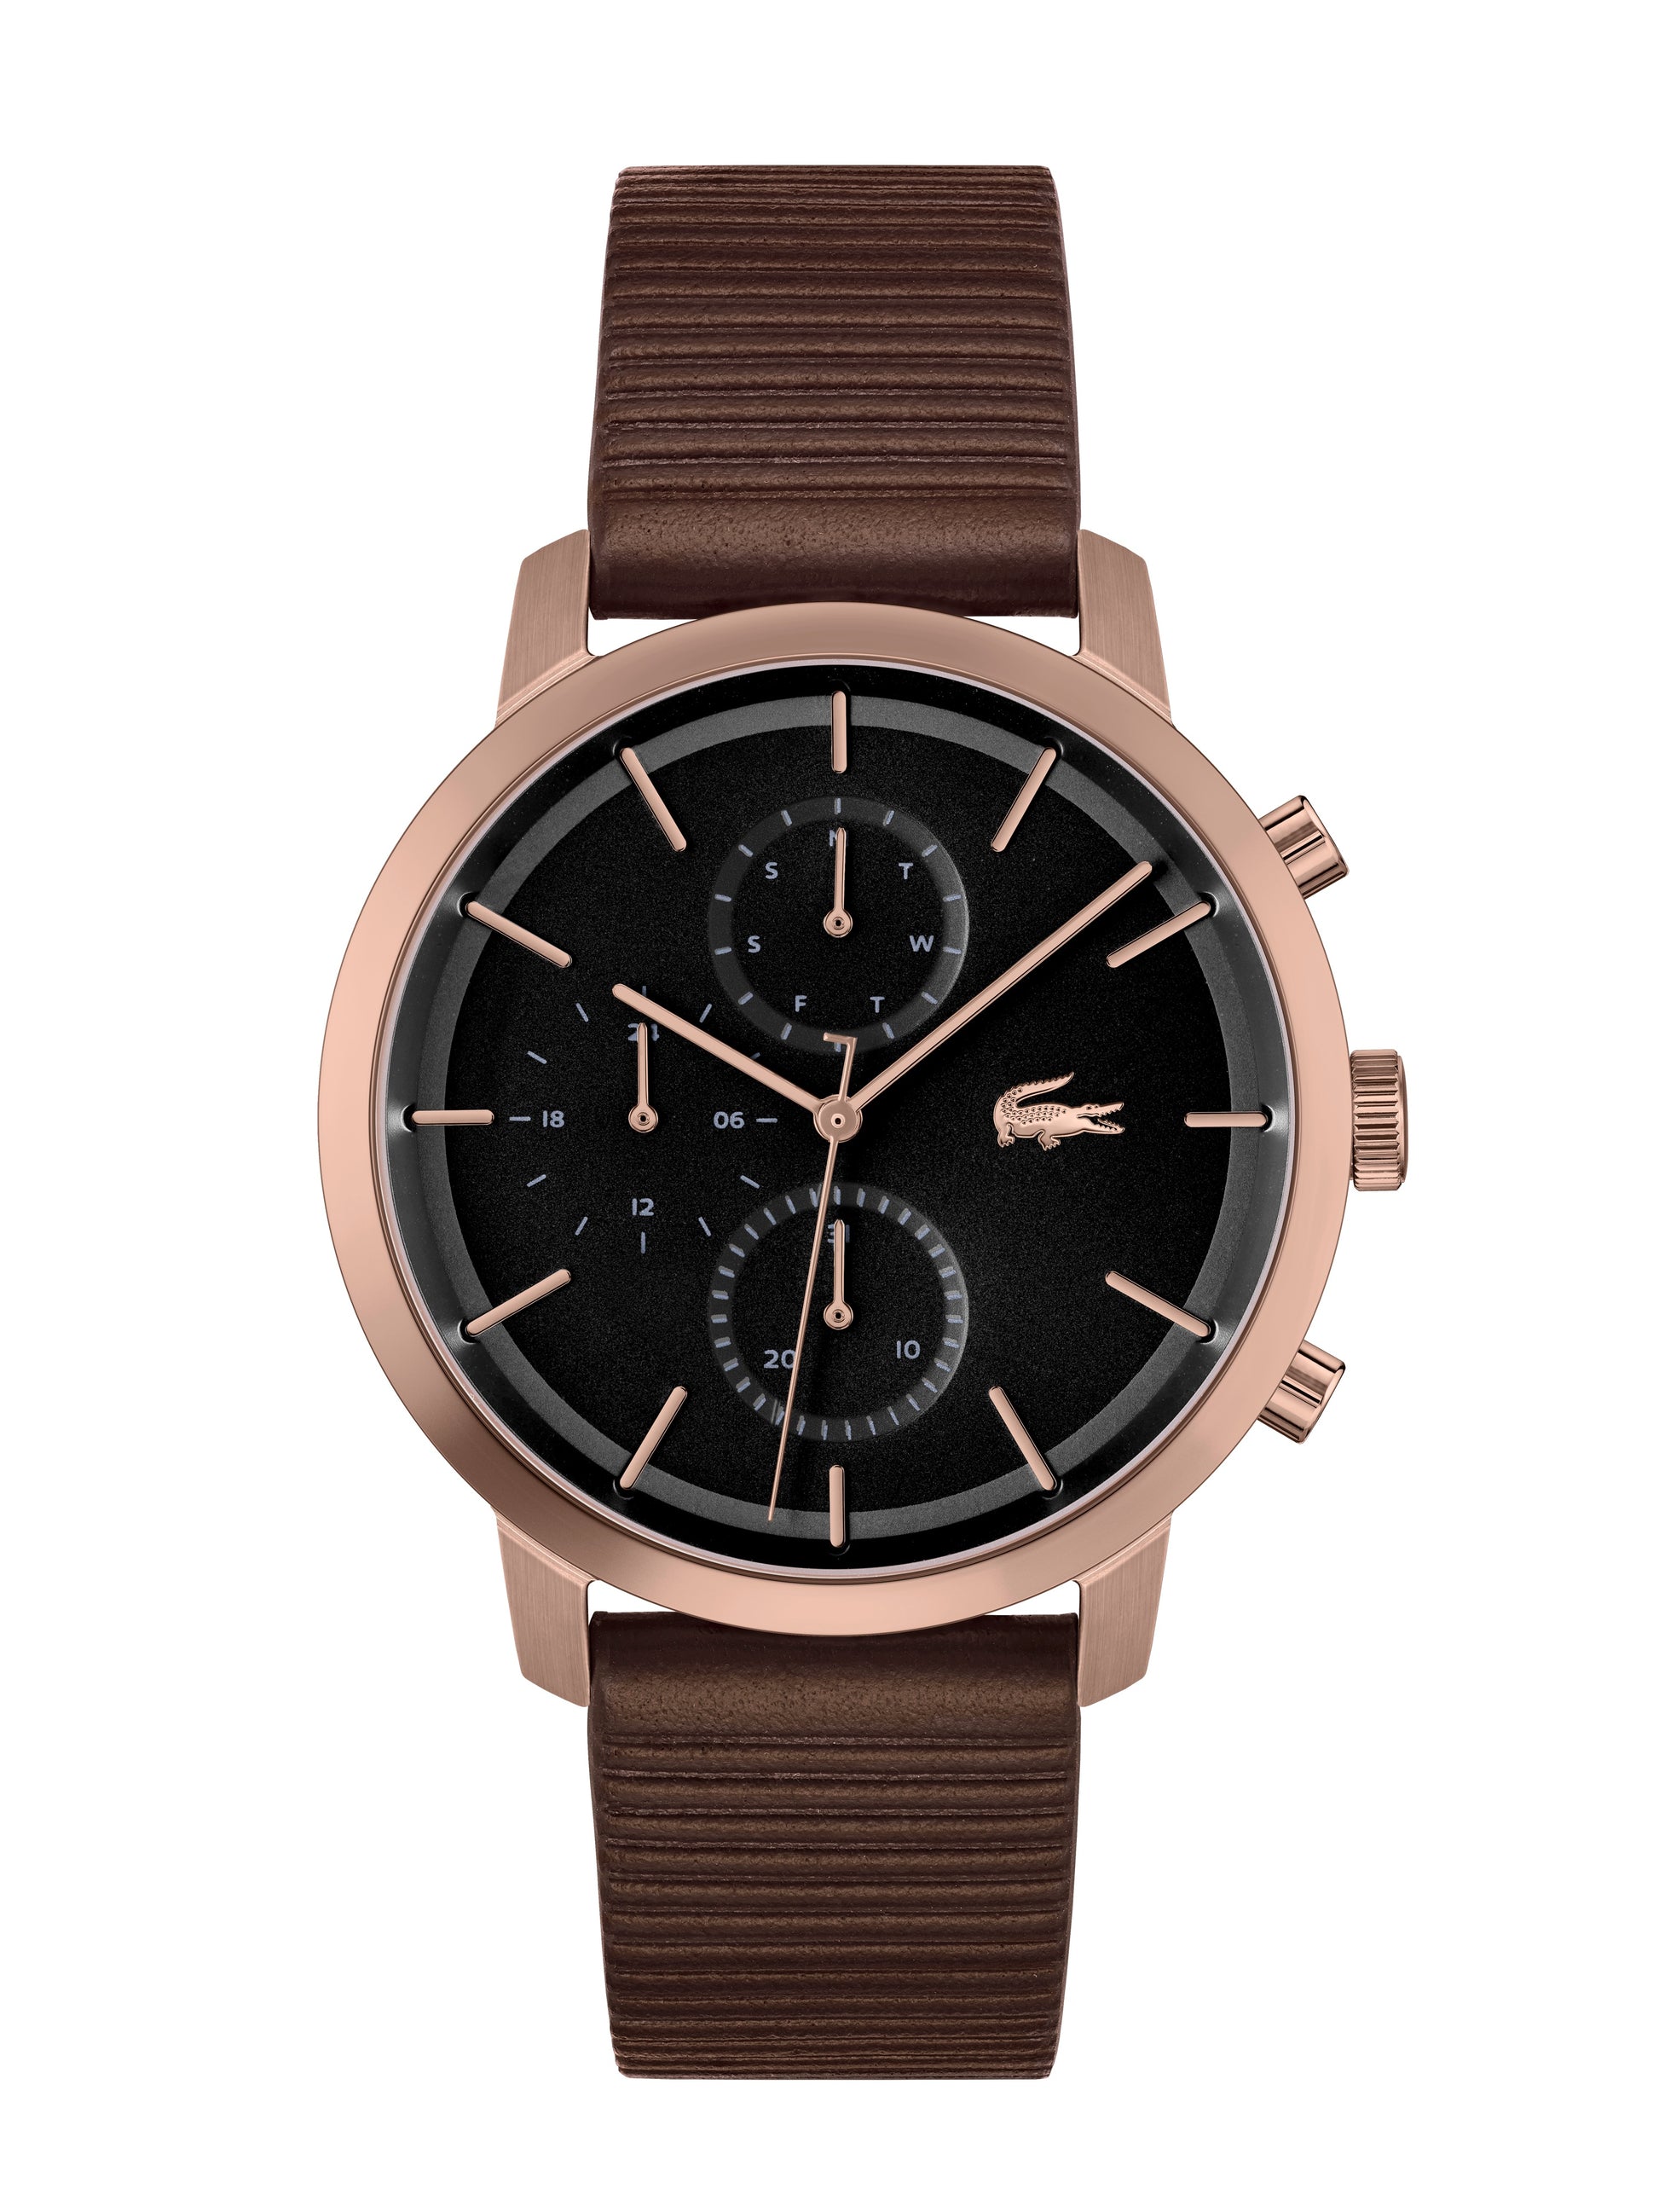 An elegant Men's Replay Black - Brown Watch 2011257 by Lacoste with a brown leather strap and black dial.